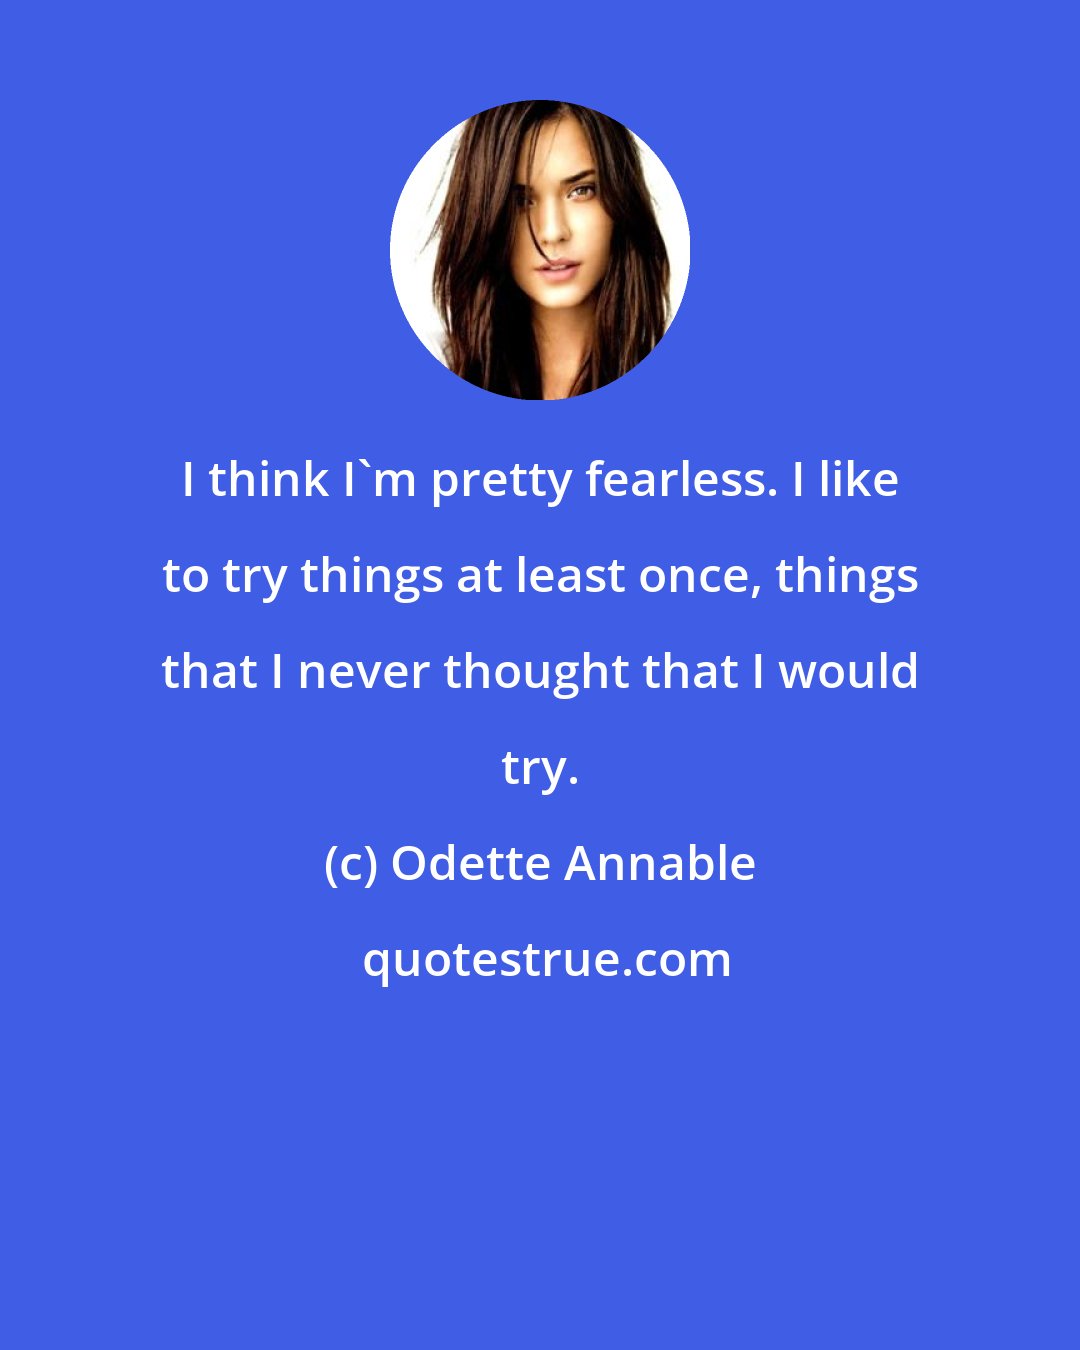 Odette Annable: I think I'm pretty fearless. I like to try things at least once, things that I never thought that I would try.